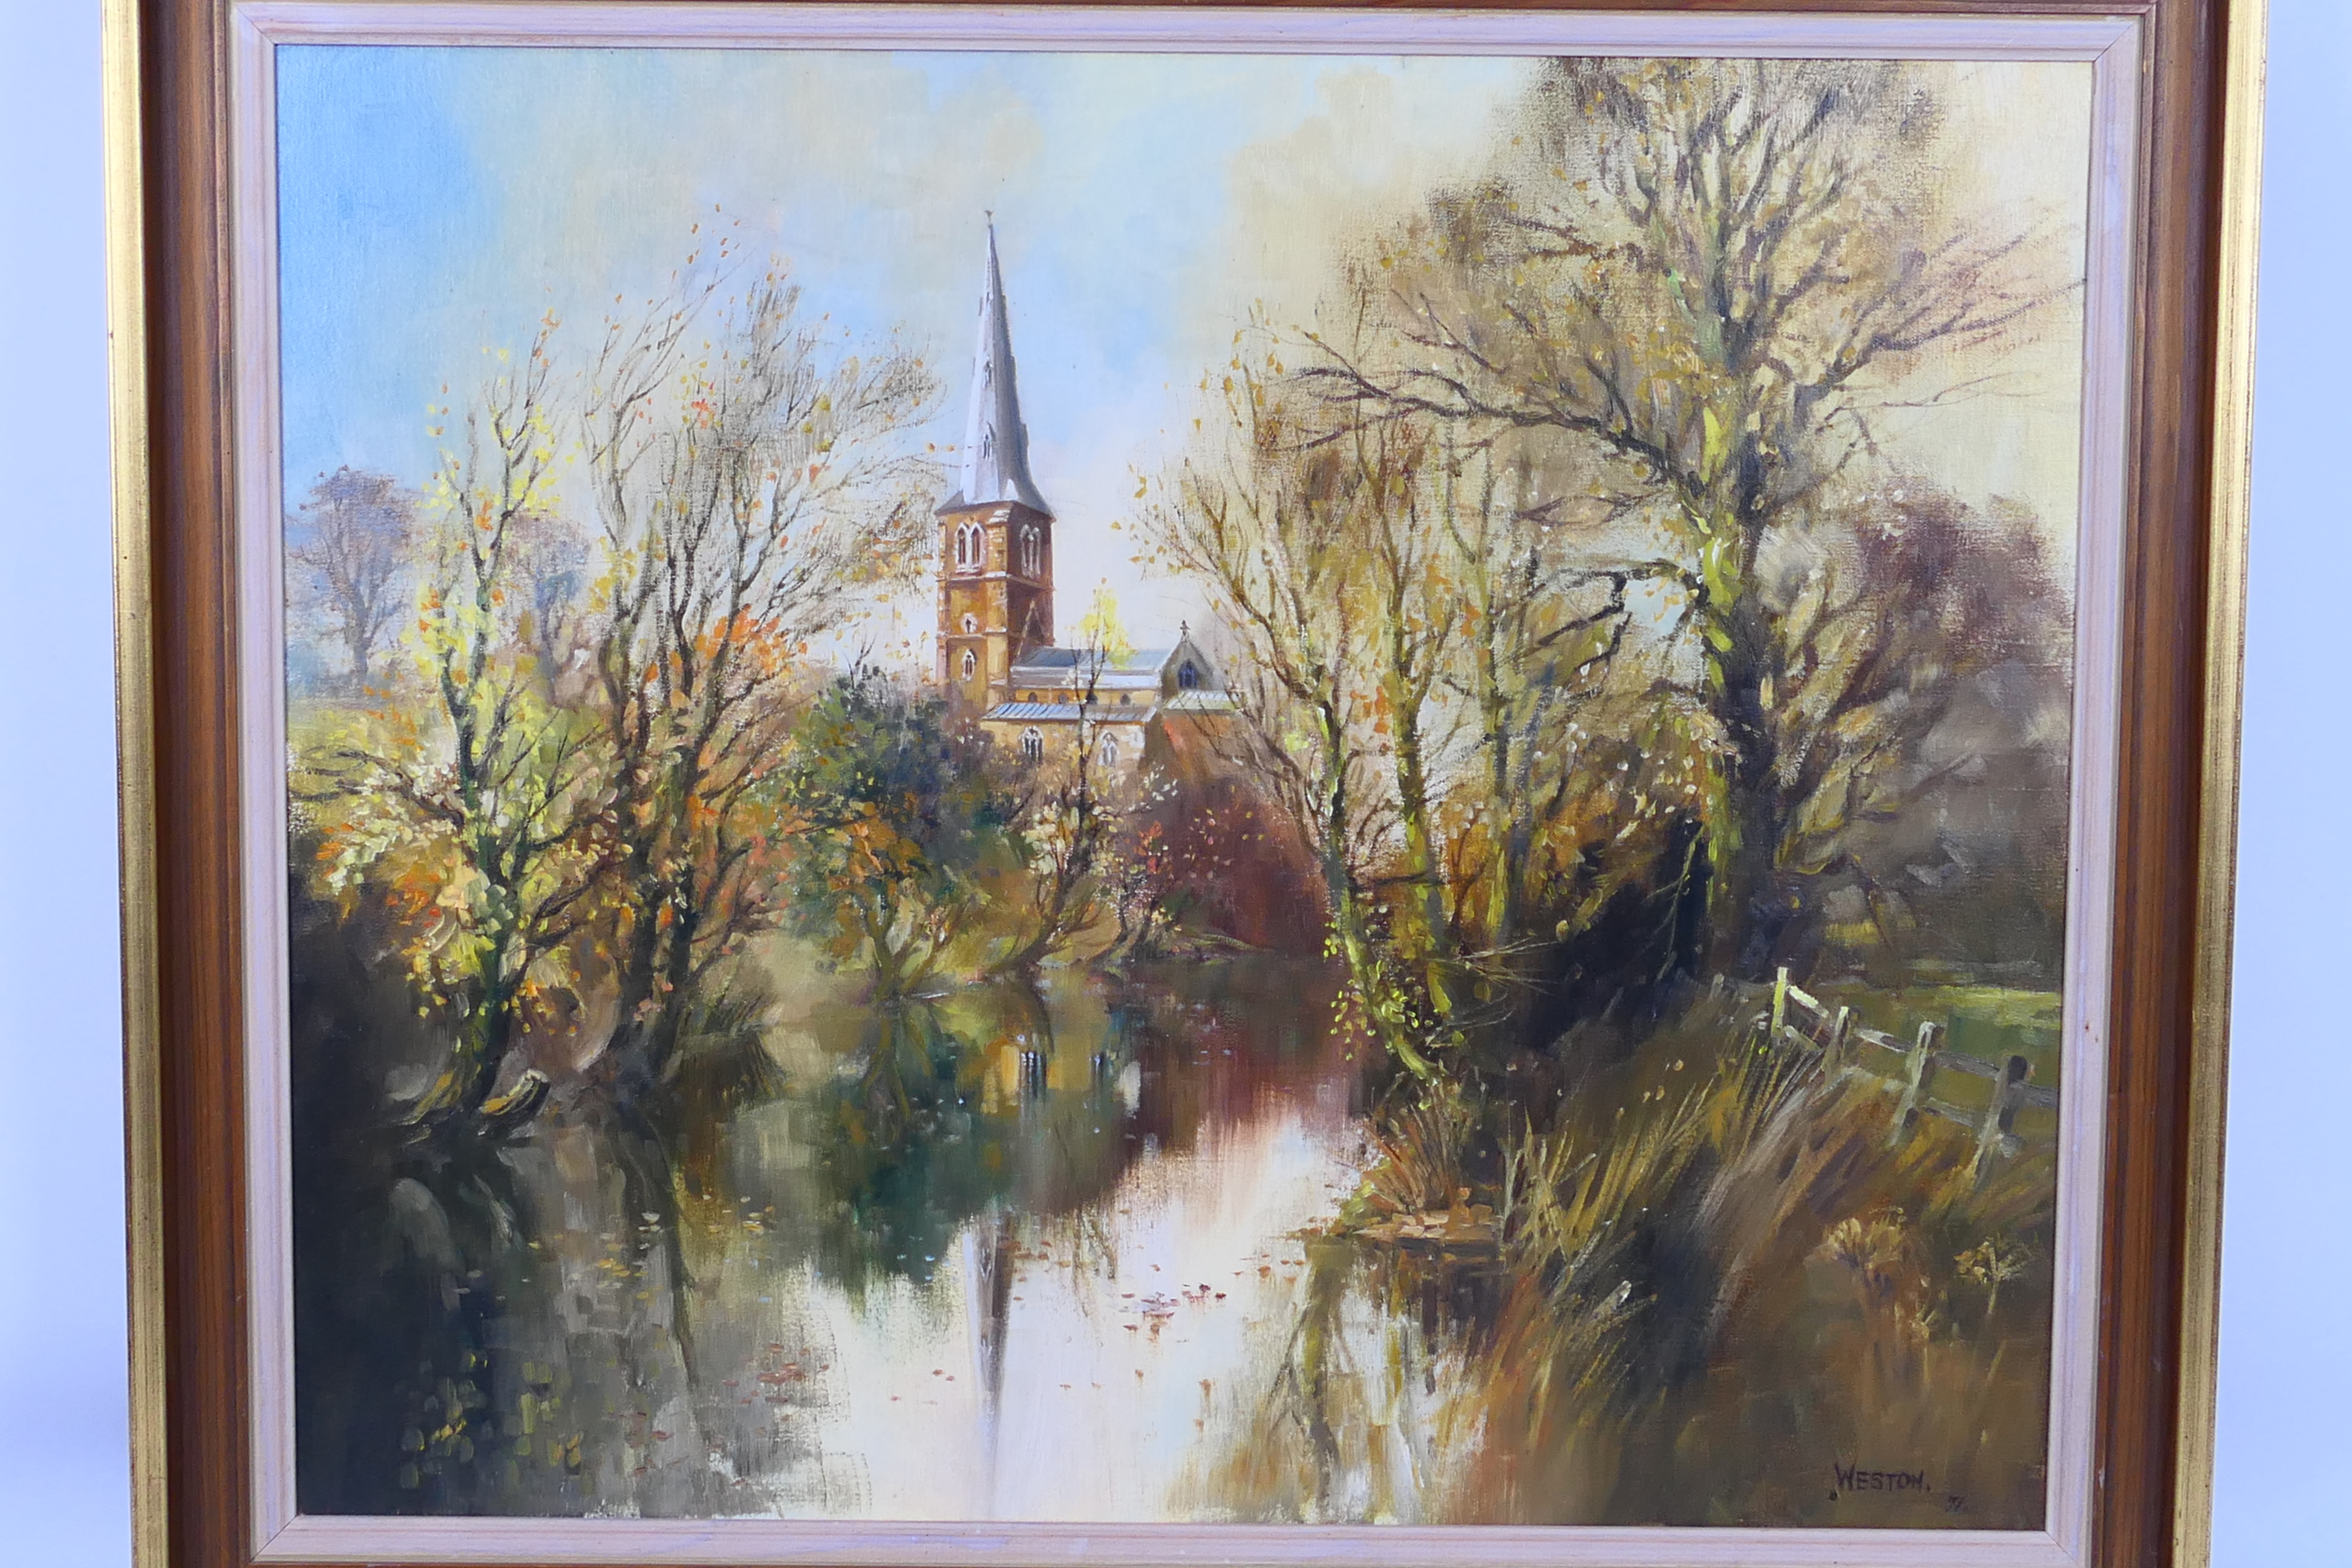 David Weston (1935 - 2011) - A framed oil on canvas landscape scene depicting a church beside a - Image 2 of 7